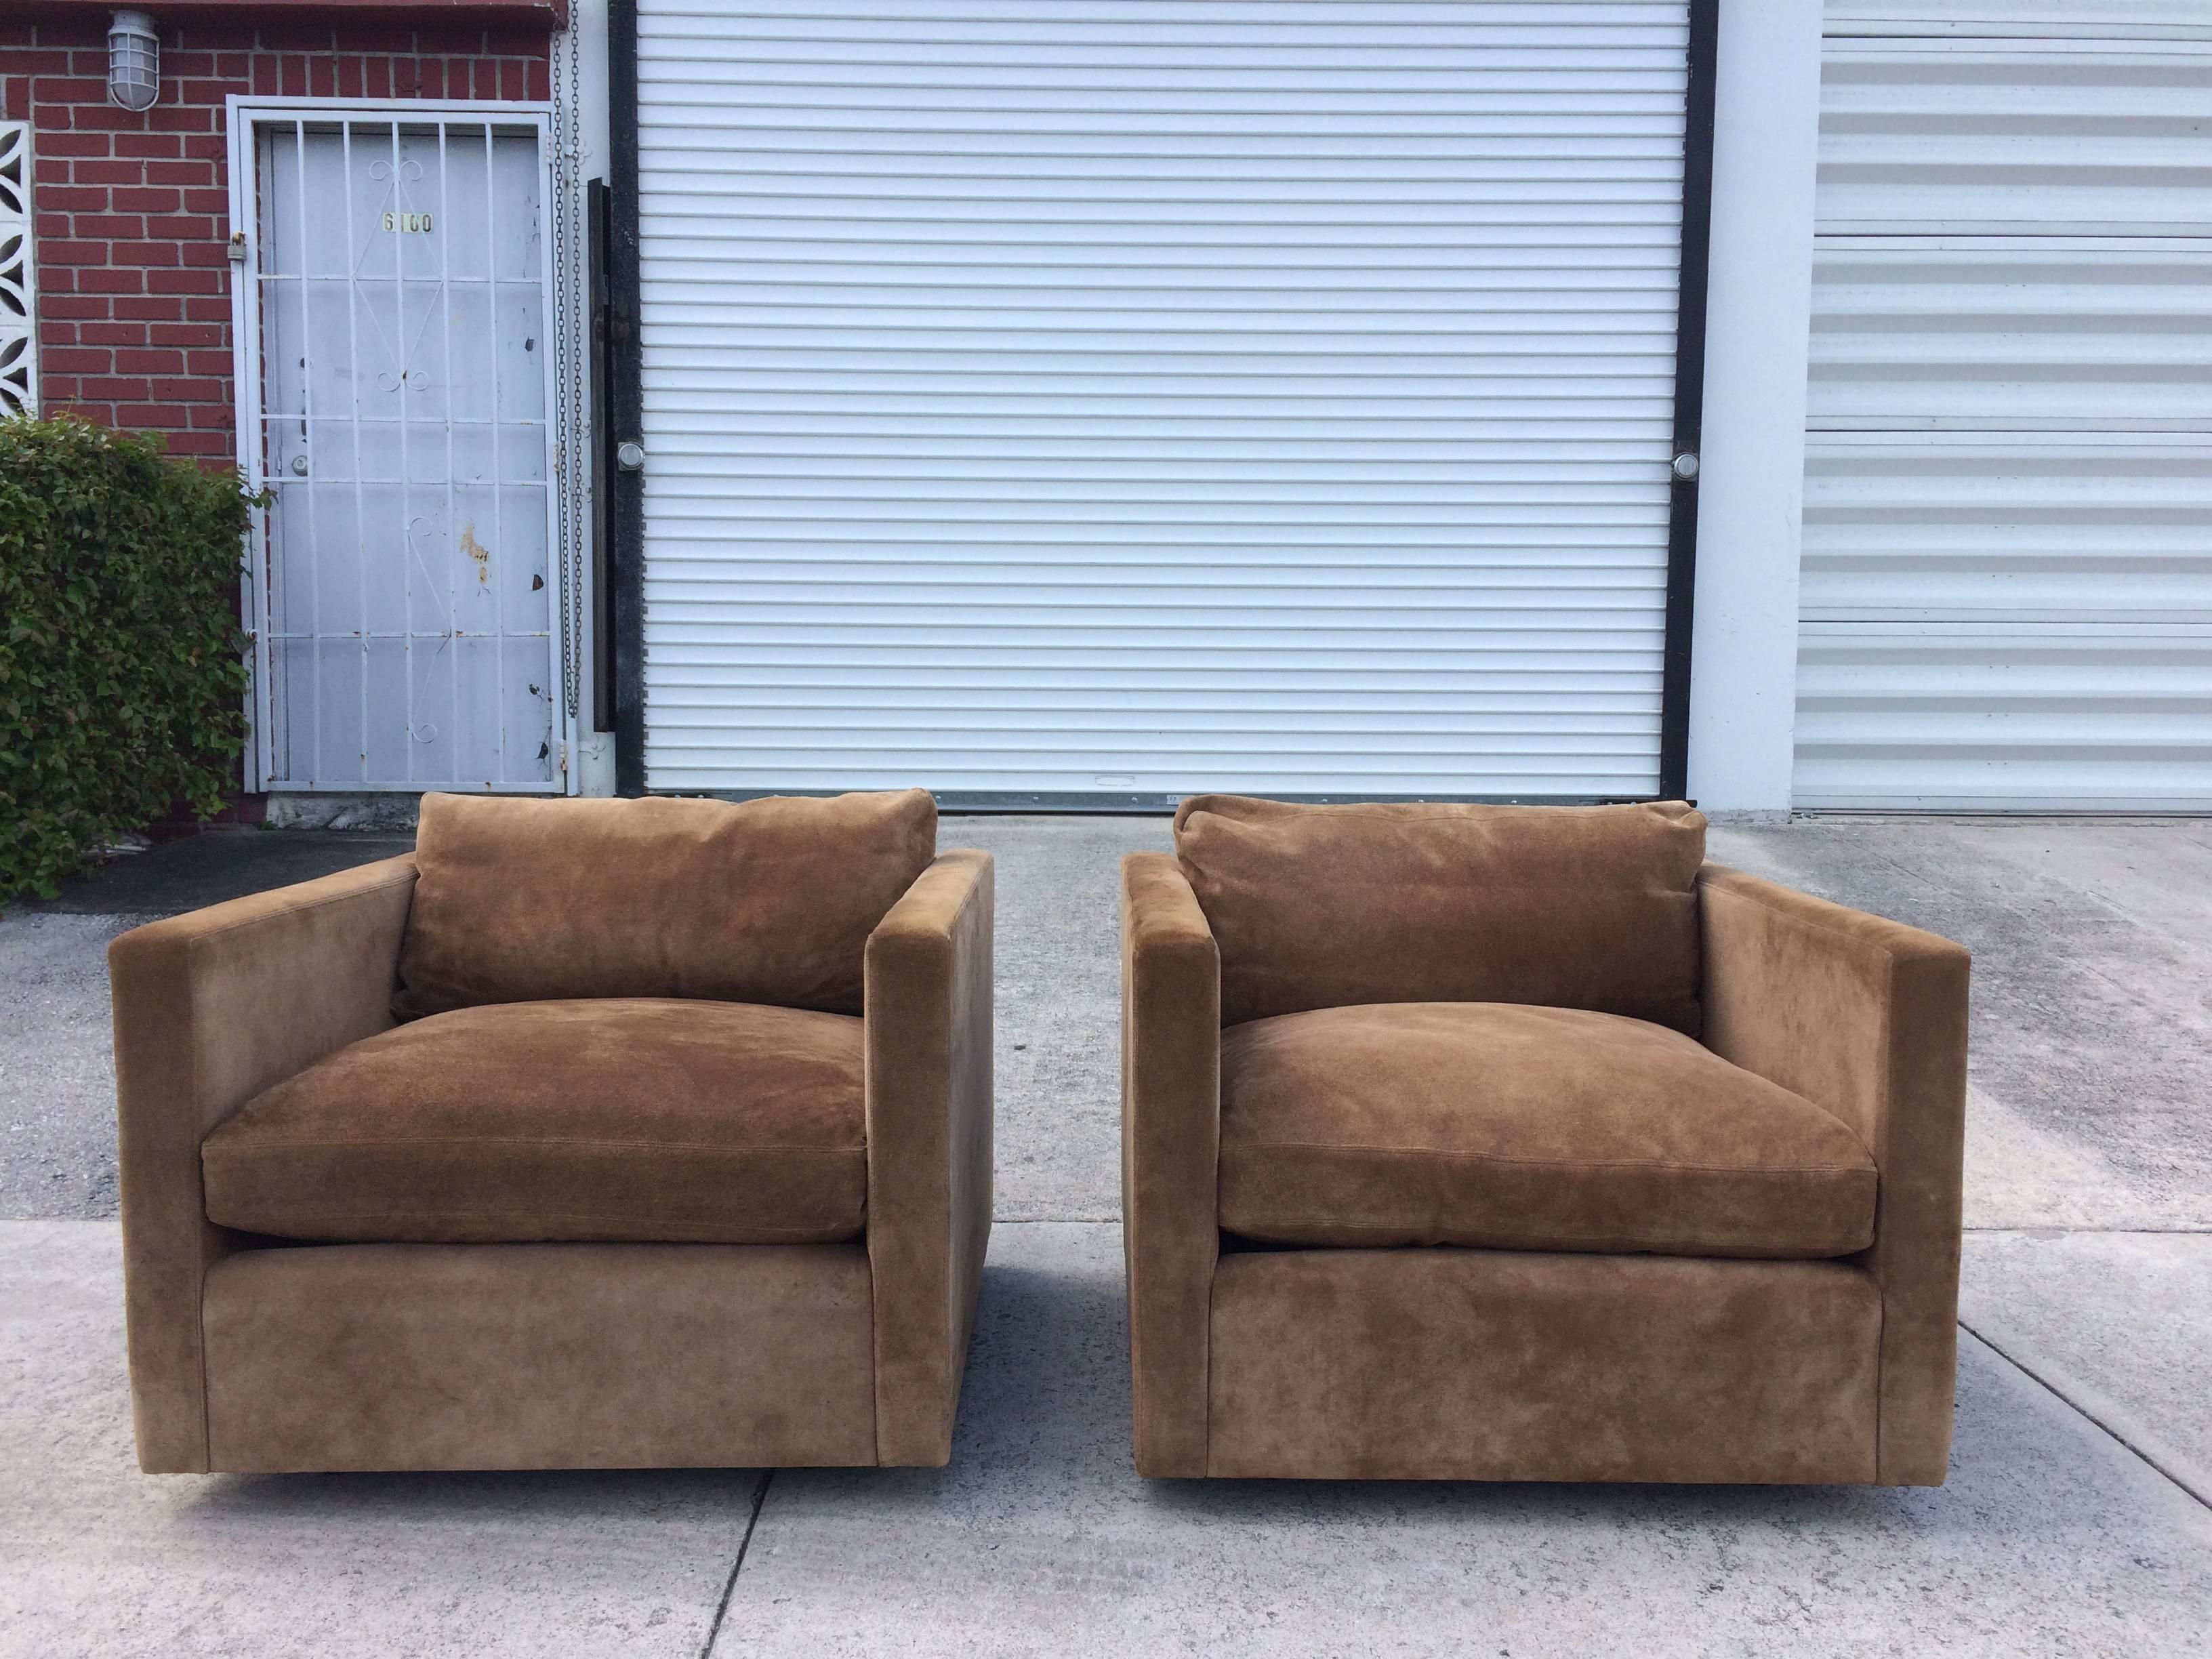 Late 20th Century Pair of Charles Pfister Suede Leather Lounge Chairs for Knoll